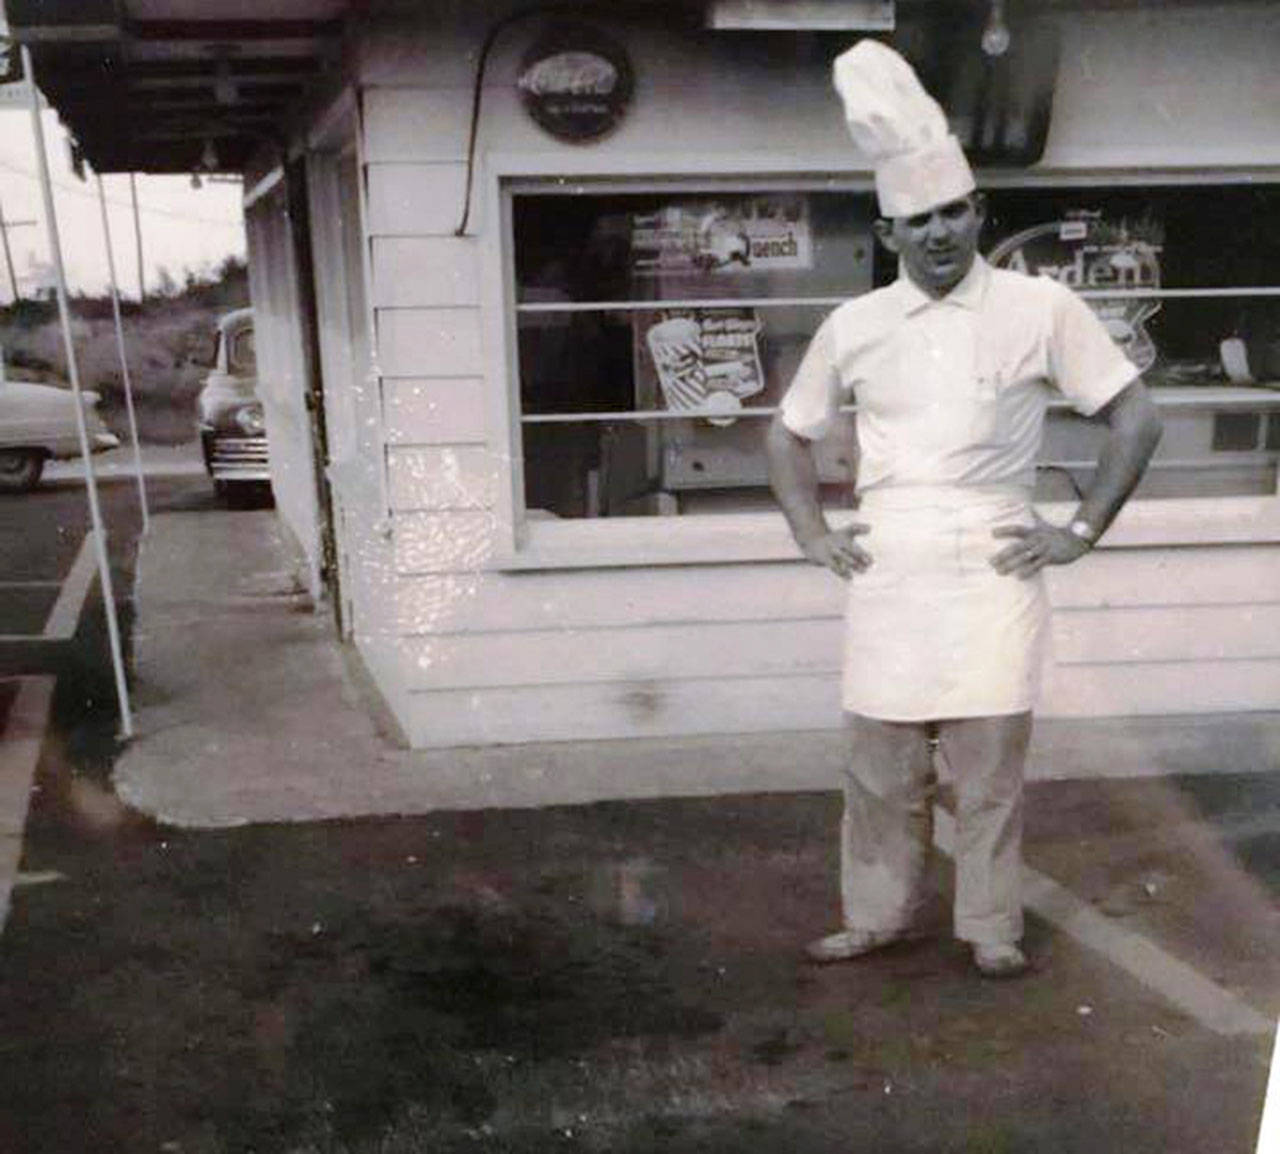 Bill Traylor is shown in front of Traylor’s Drive-In just outside of Port Angeles in the 1960s. (Julie Traylor Price)